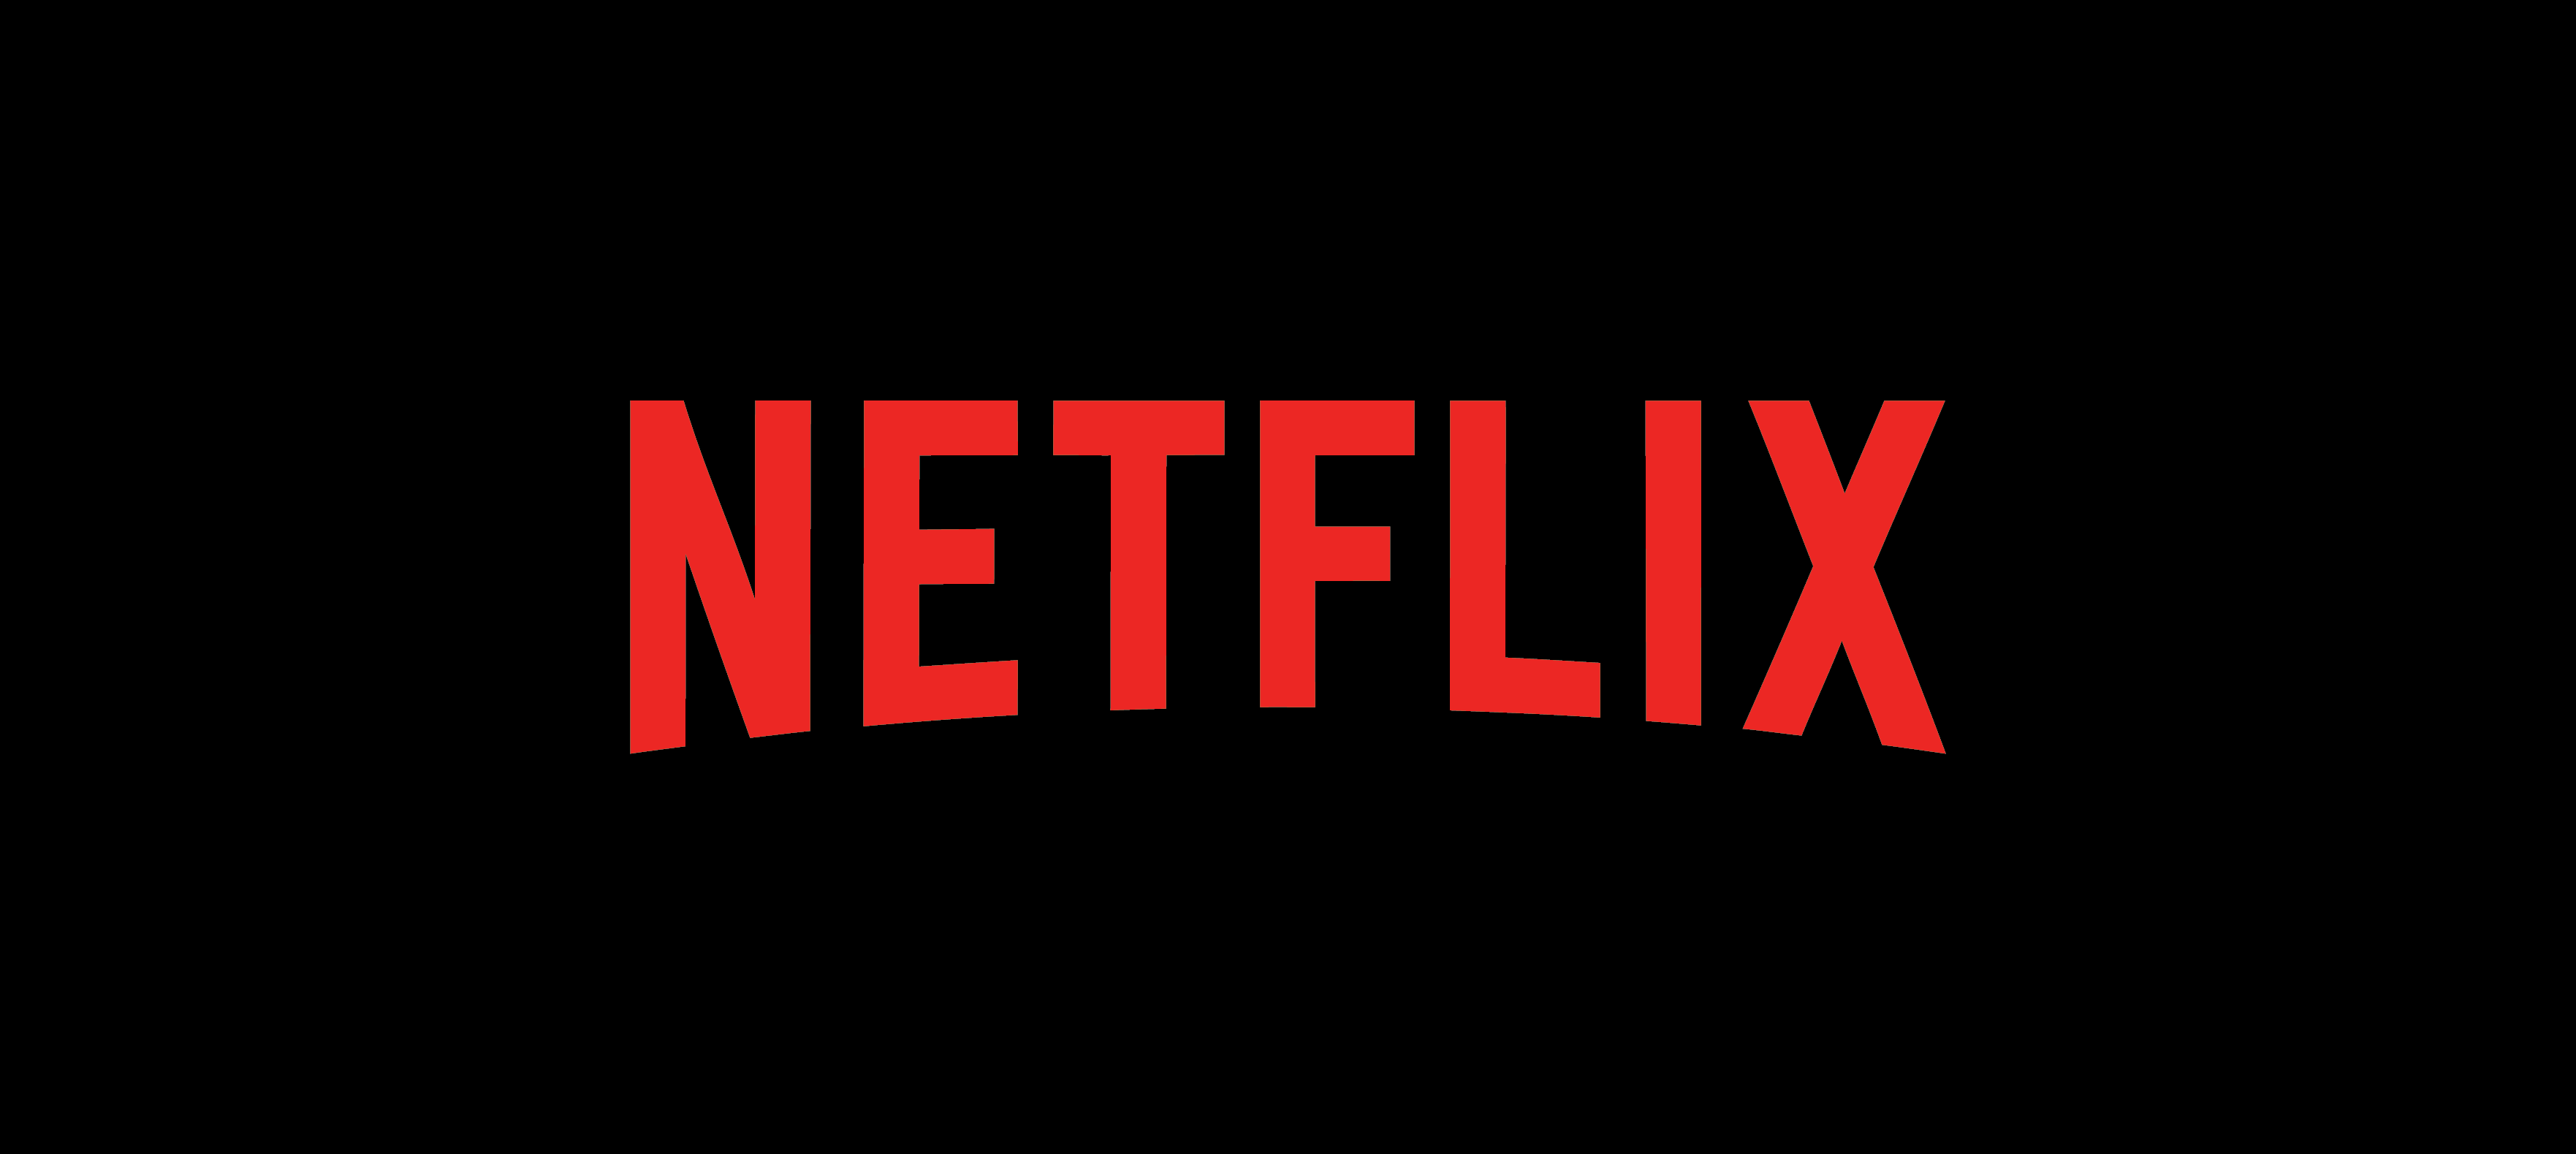 Here's Our Top Recommendations on the Netflix February 2022 Lineup